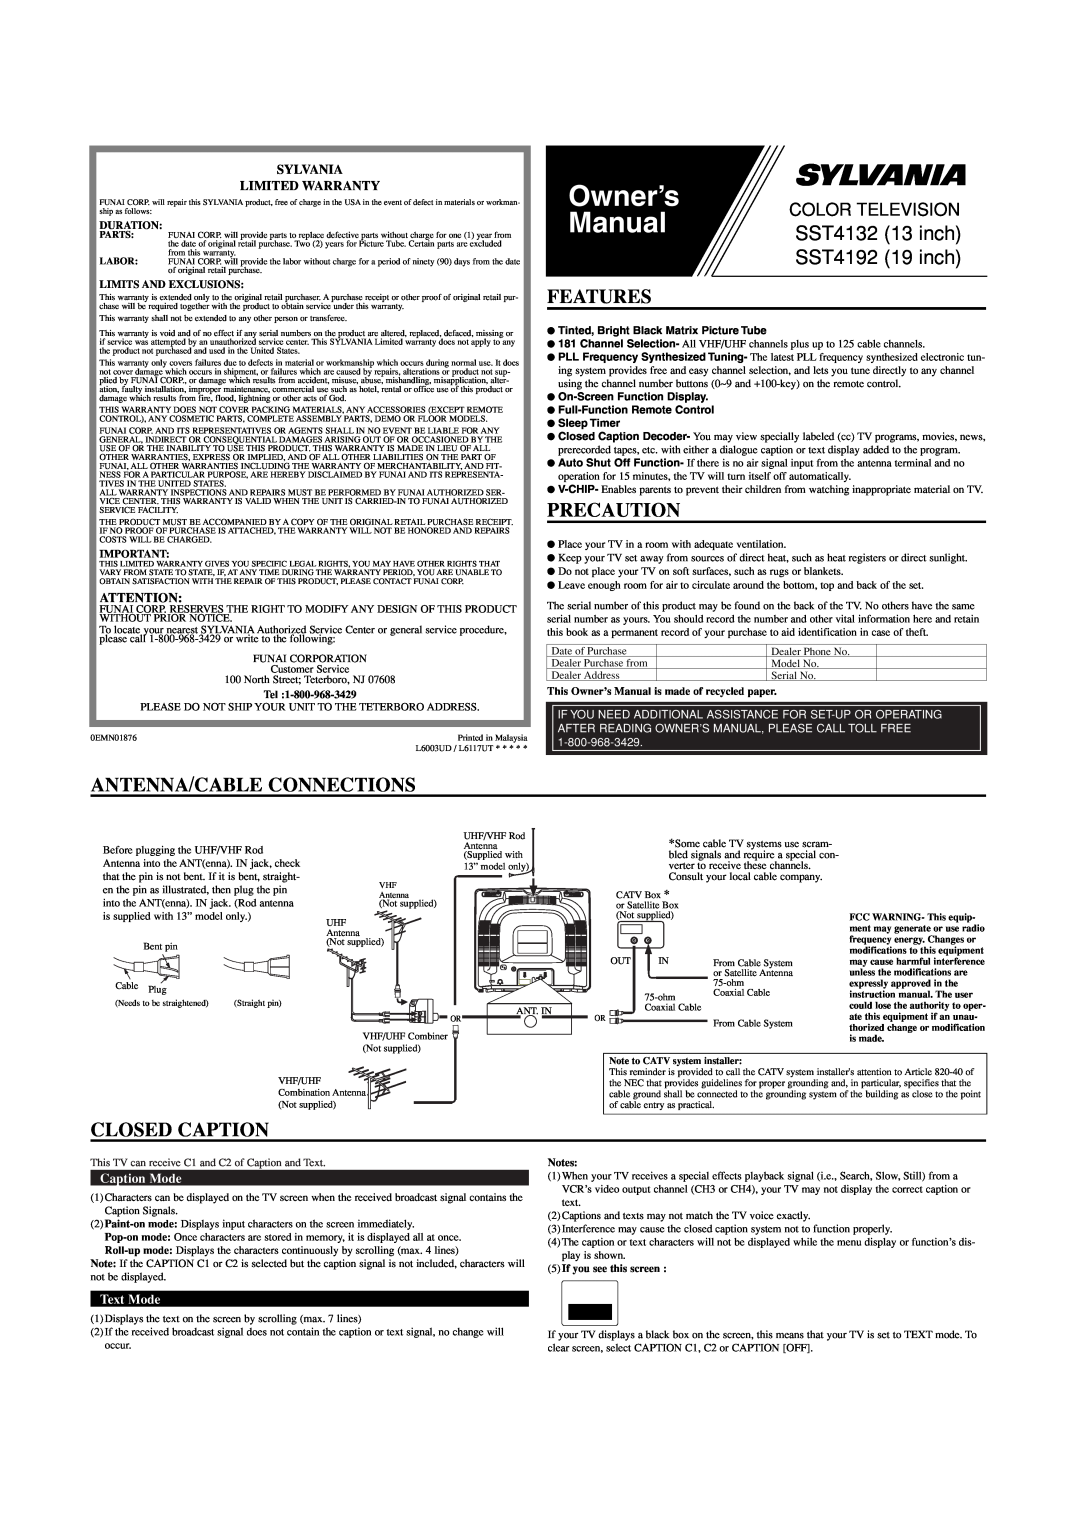 Sylvania SST4132, SST4192 owner manual Features, Precaution, Antenna/Cable Connections, Closed Caption, Caption Mode 